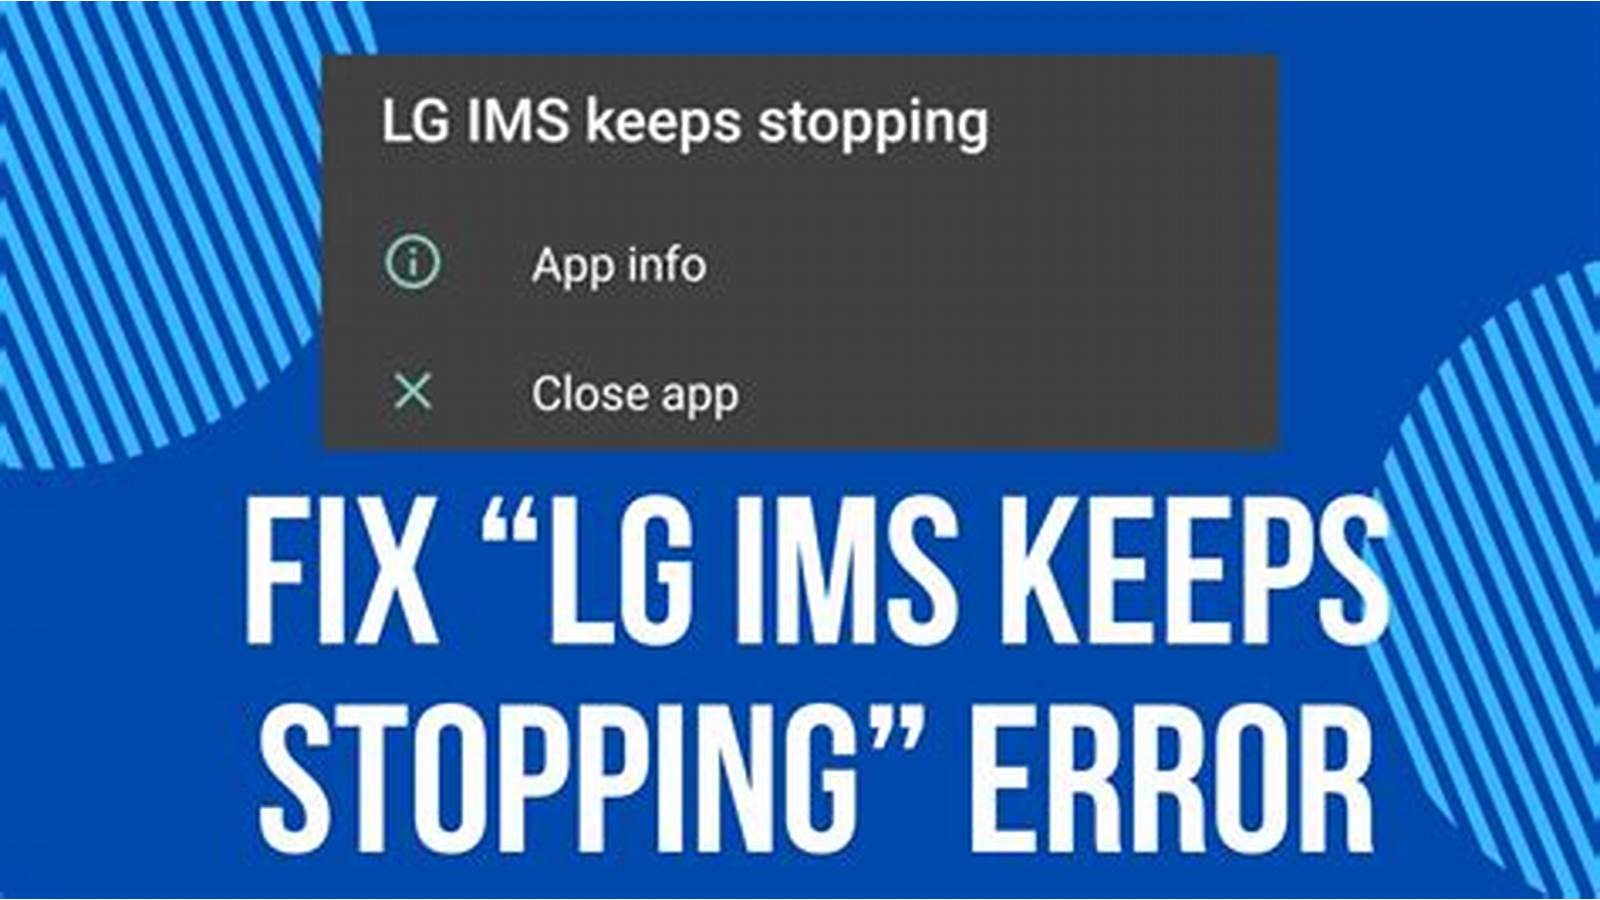 Why does LG IMS error happen?